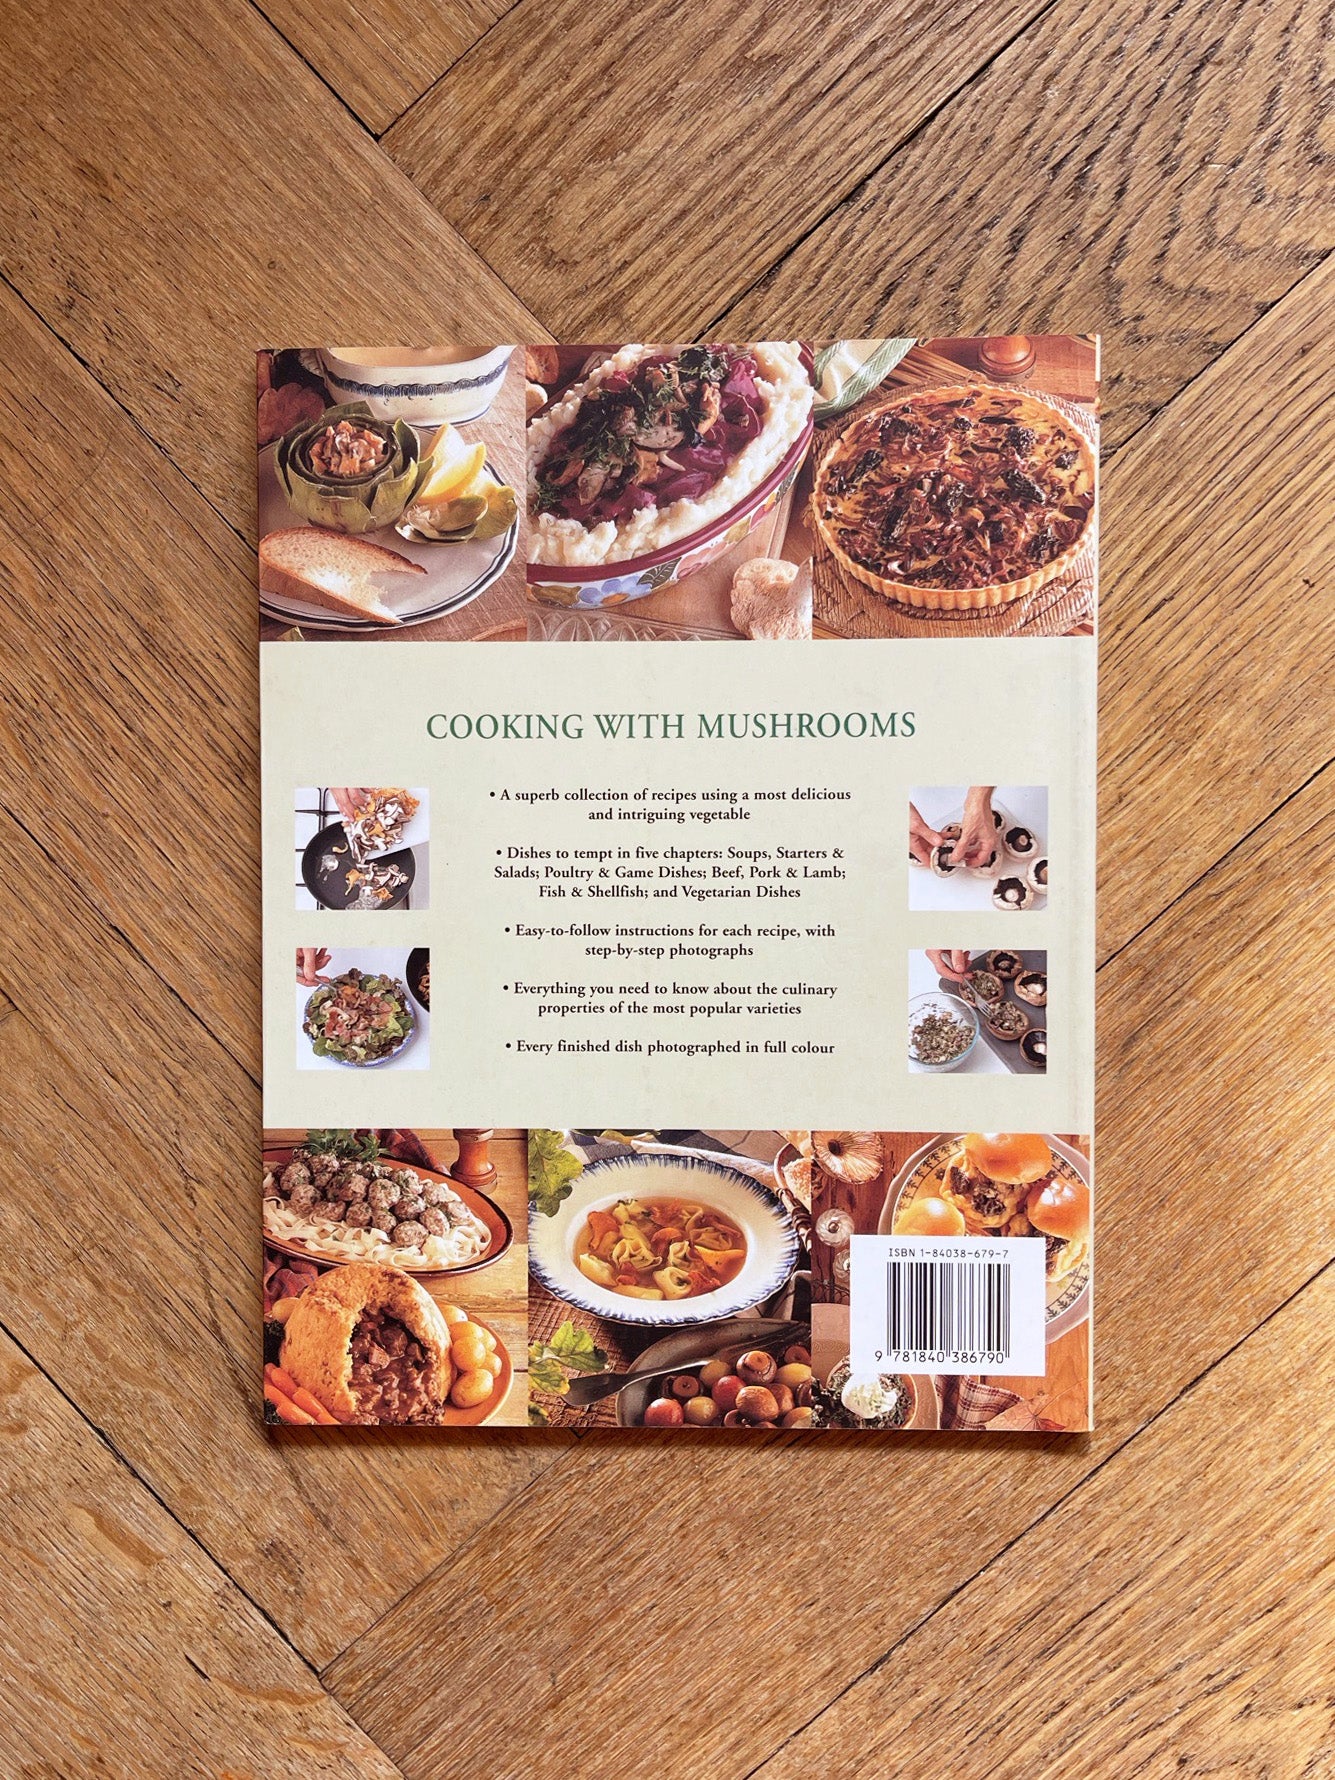 Cookings with Mushrooms by Steven Wheeler